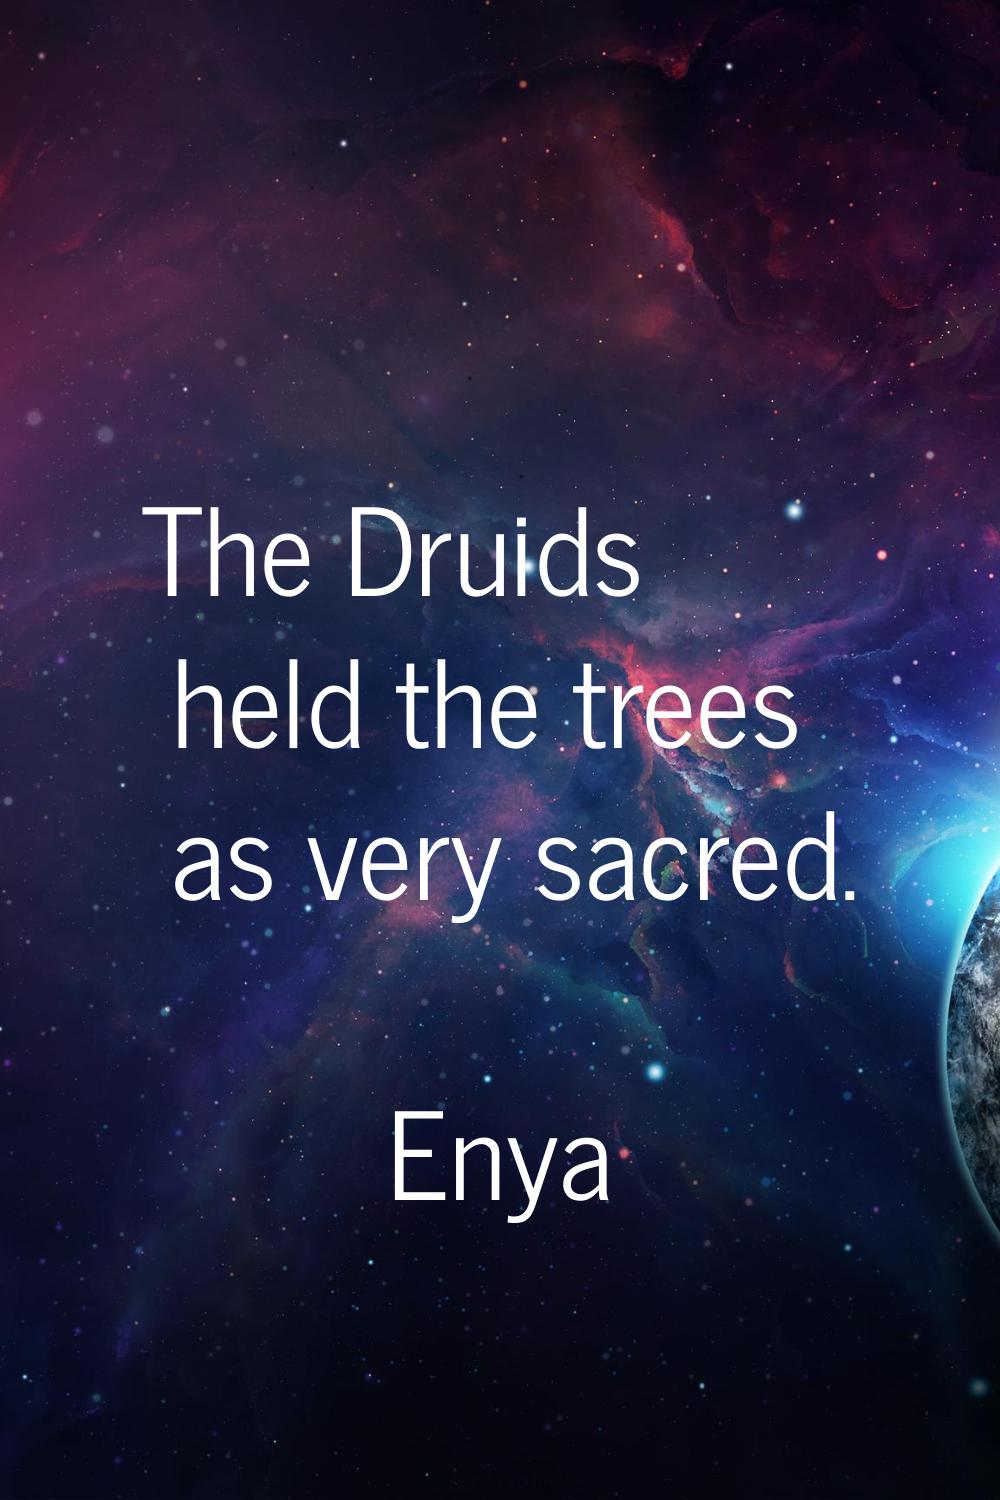 The Druids held the trees as very sacred.